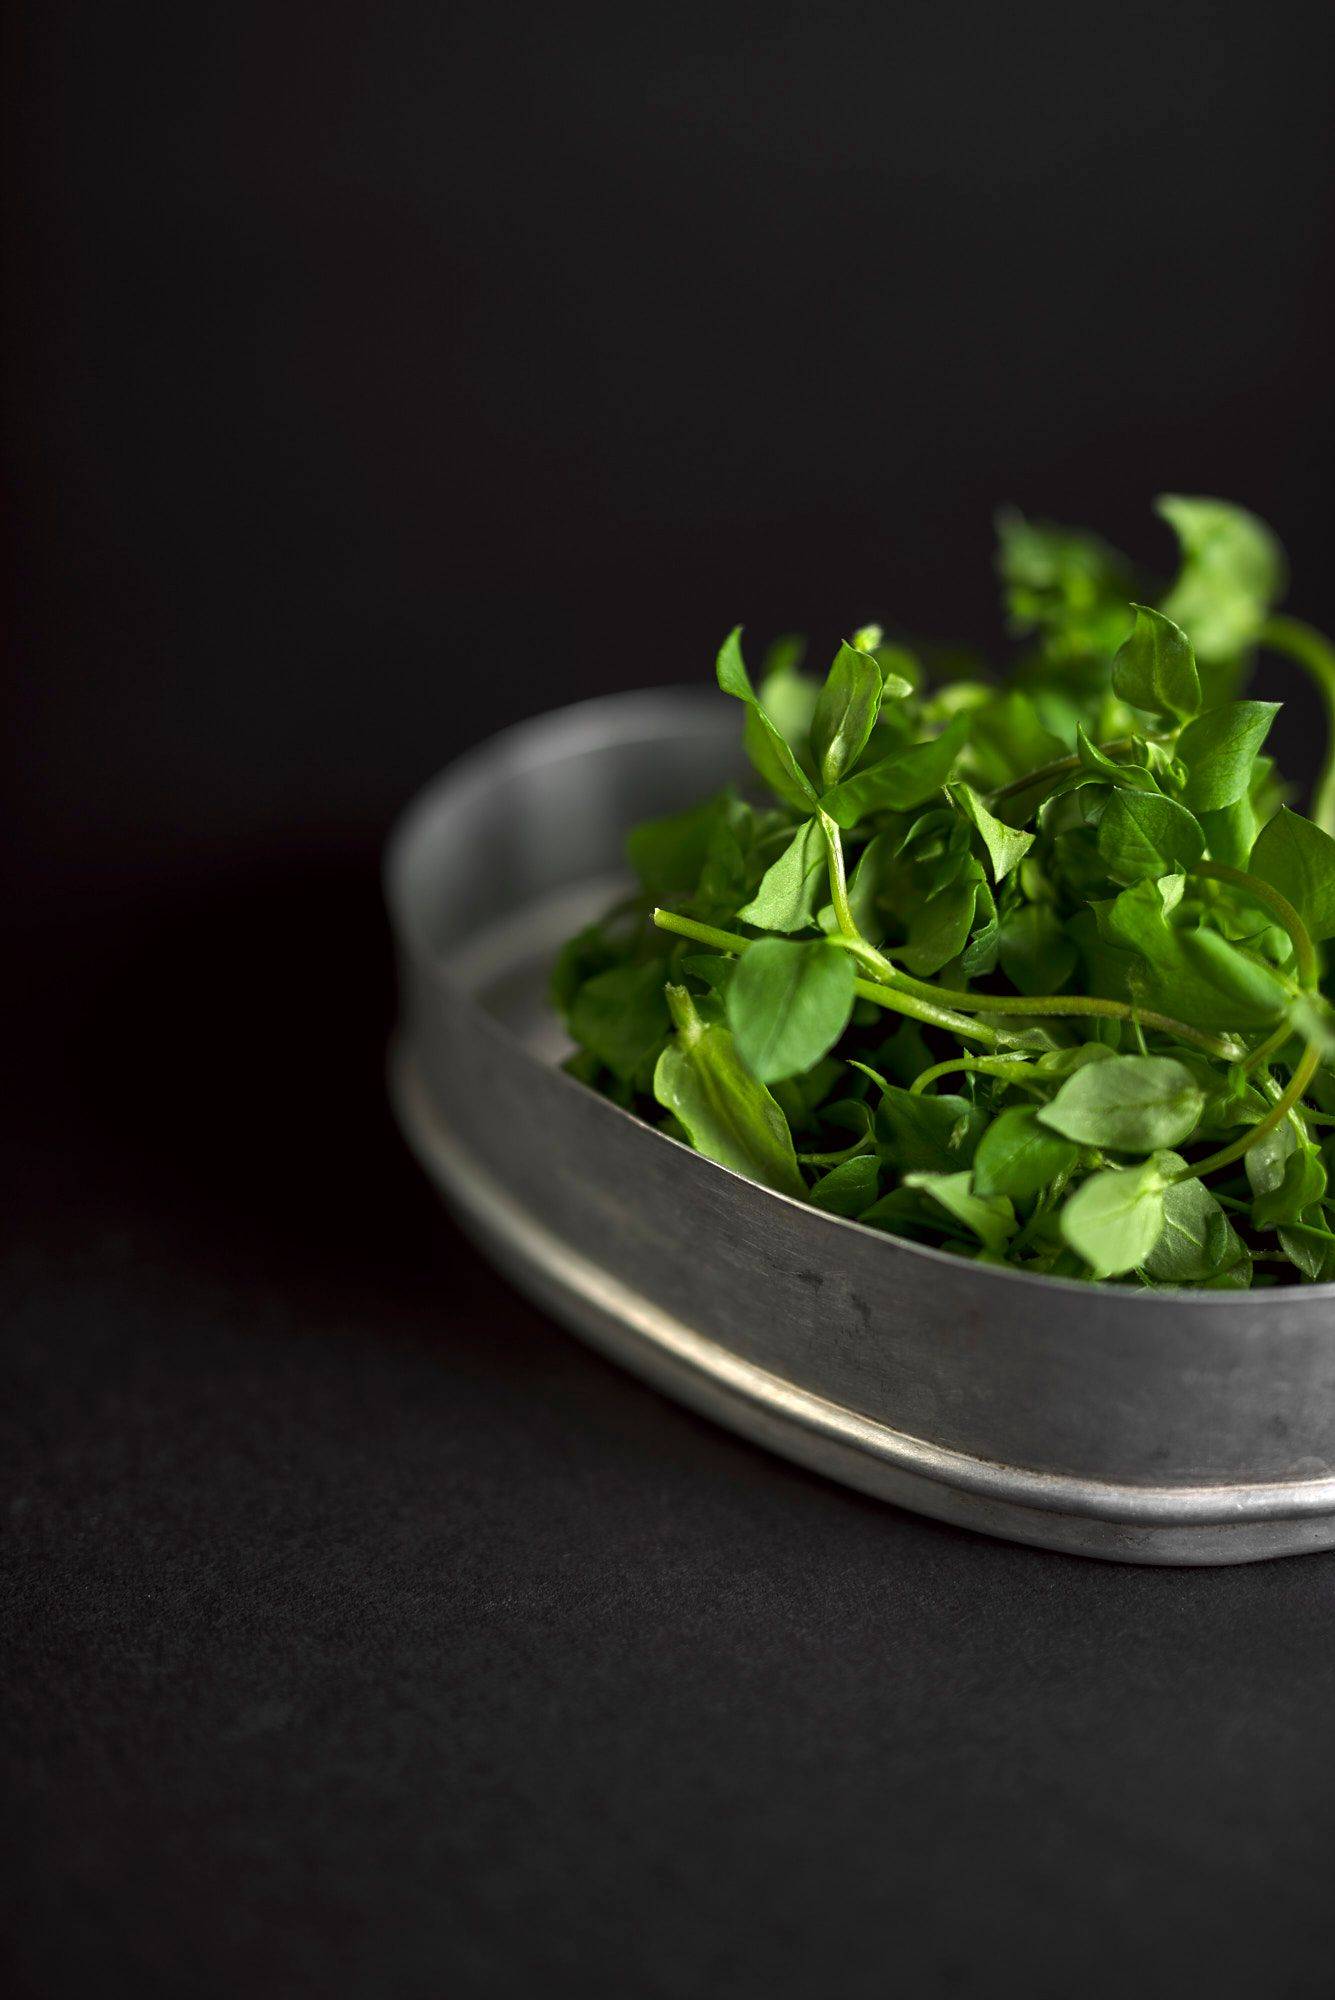 chickweed in a vintage lunch box on black background